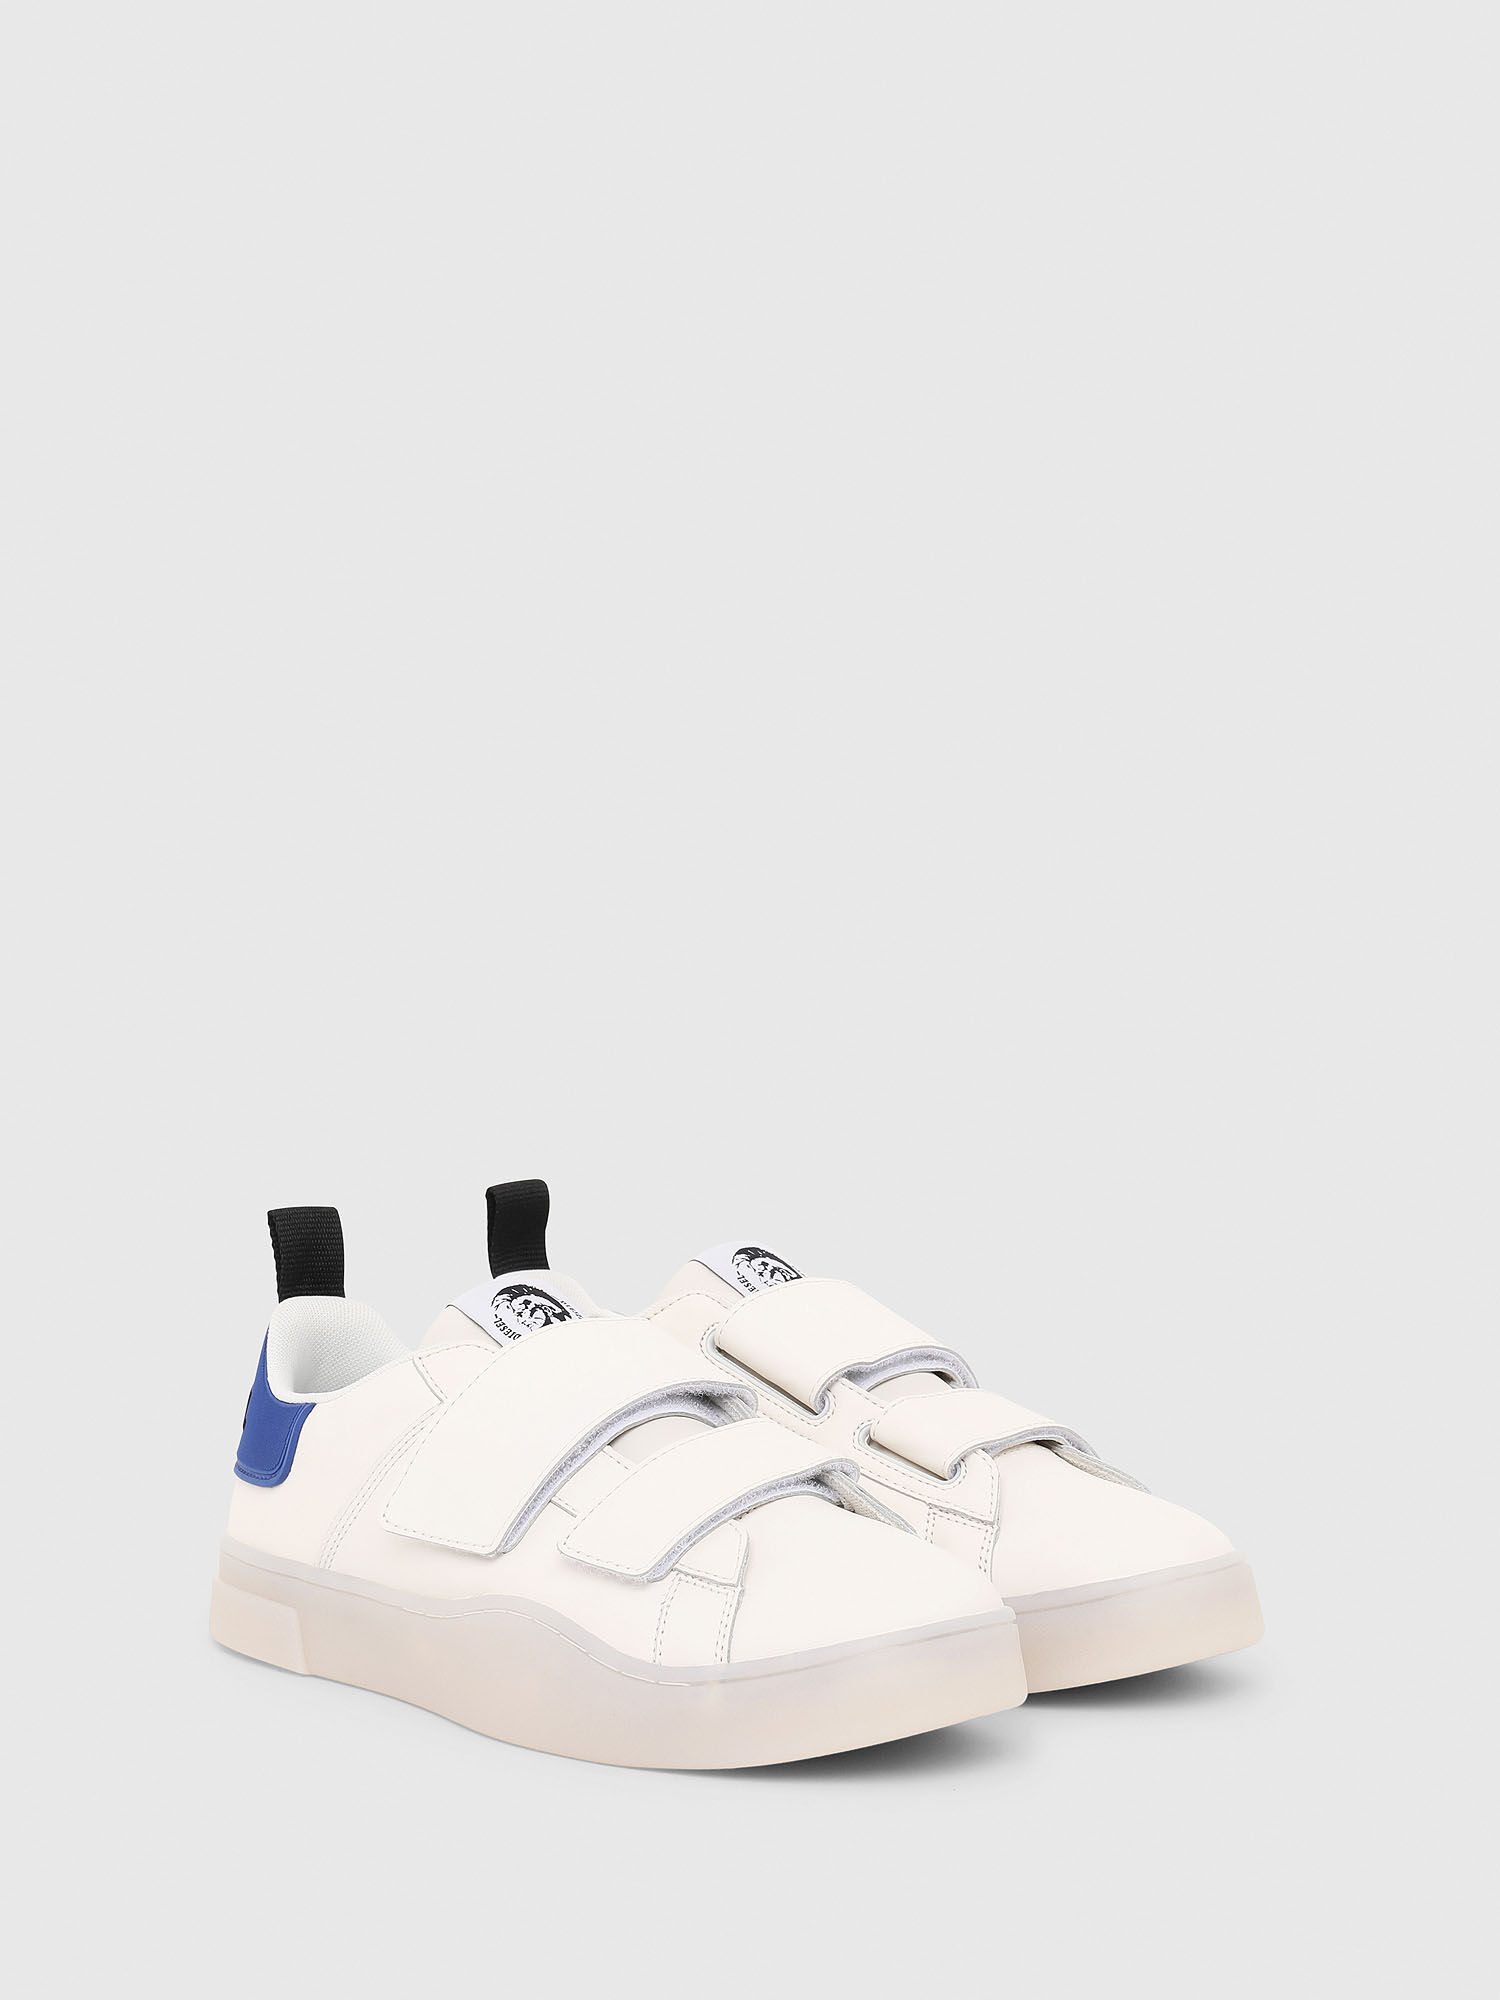 S-CLEVER LOW STRAP Man: Sneakers with velcro straps | Diesel